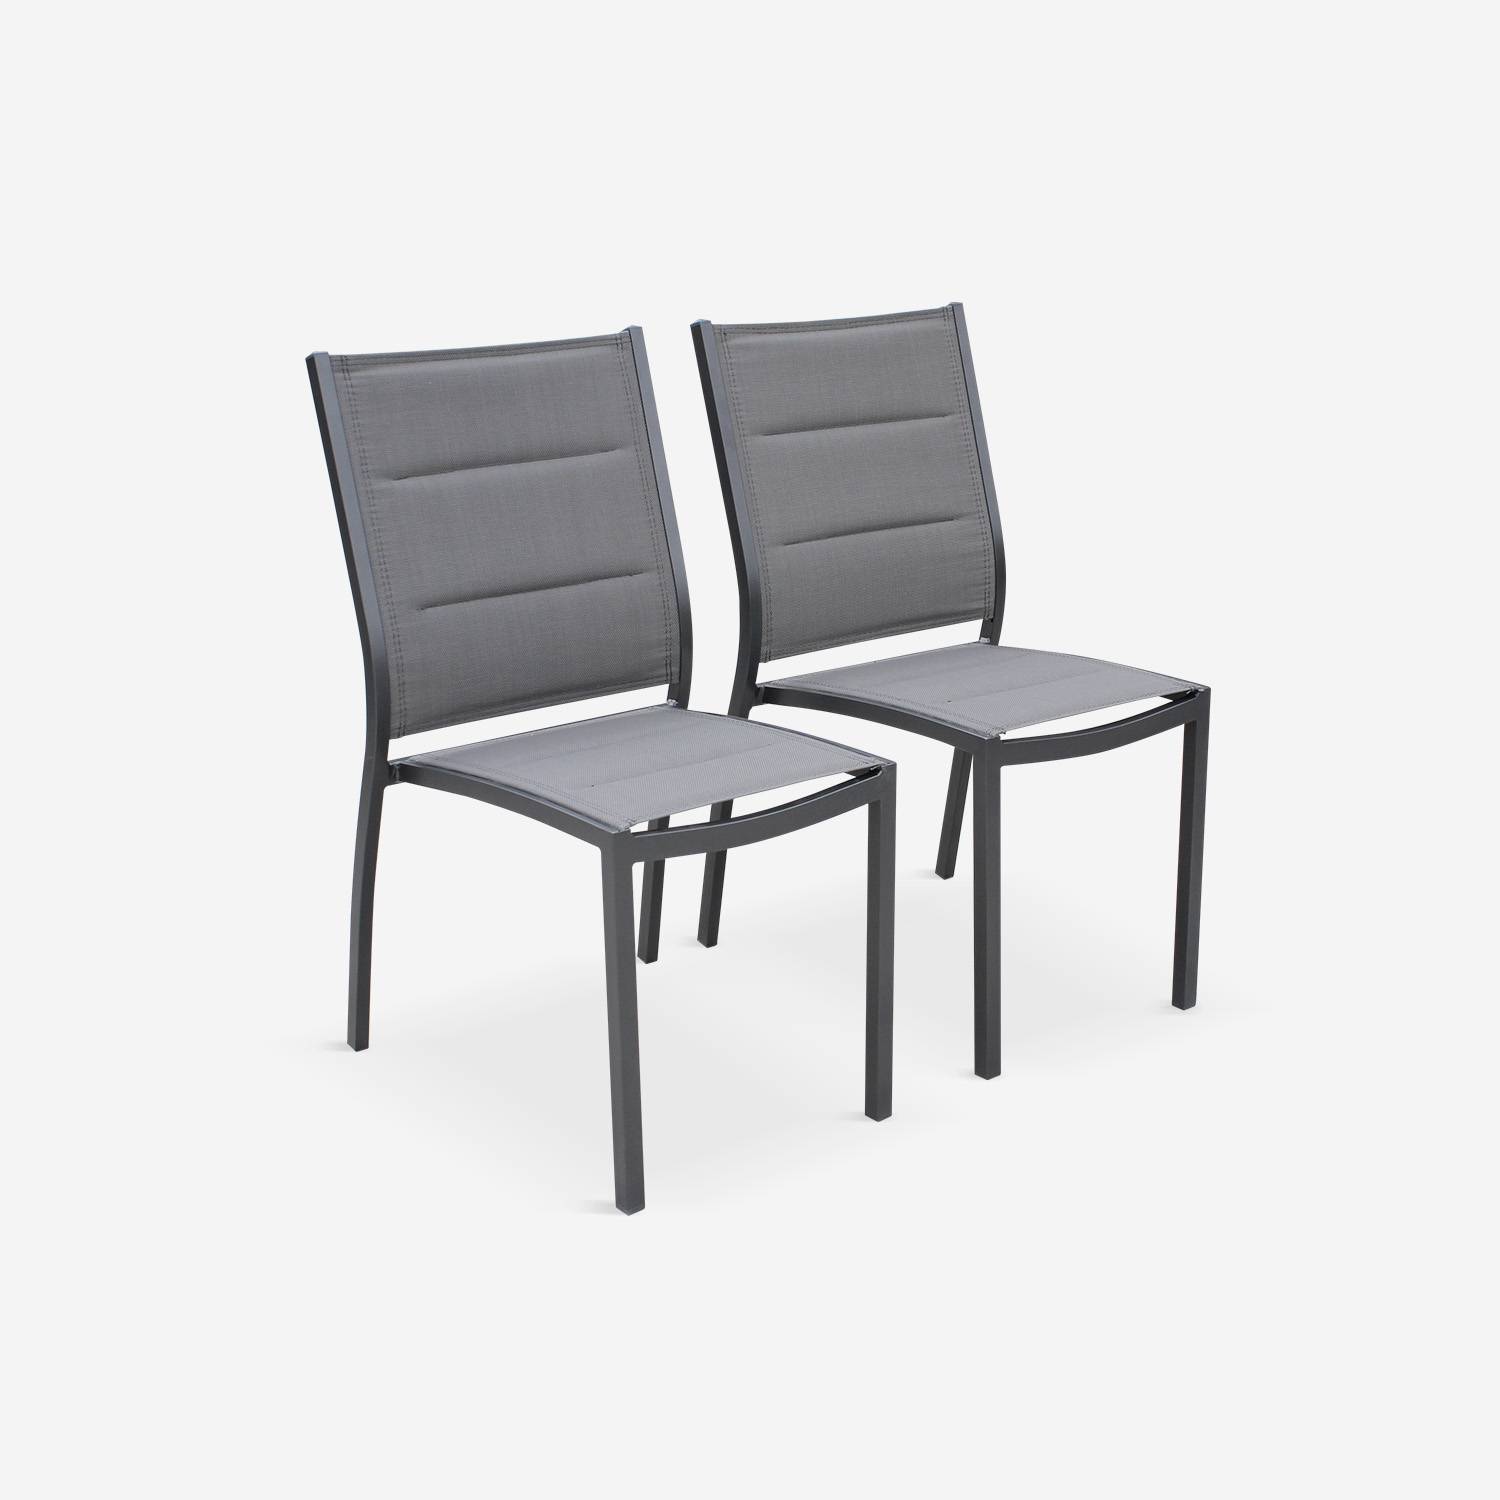 Set of 2 stackable chairs - Chicago - Anthracite aluminium and Charcoal Gray textilene Photo3